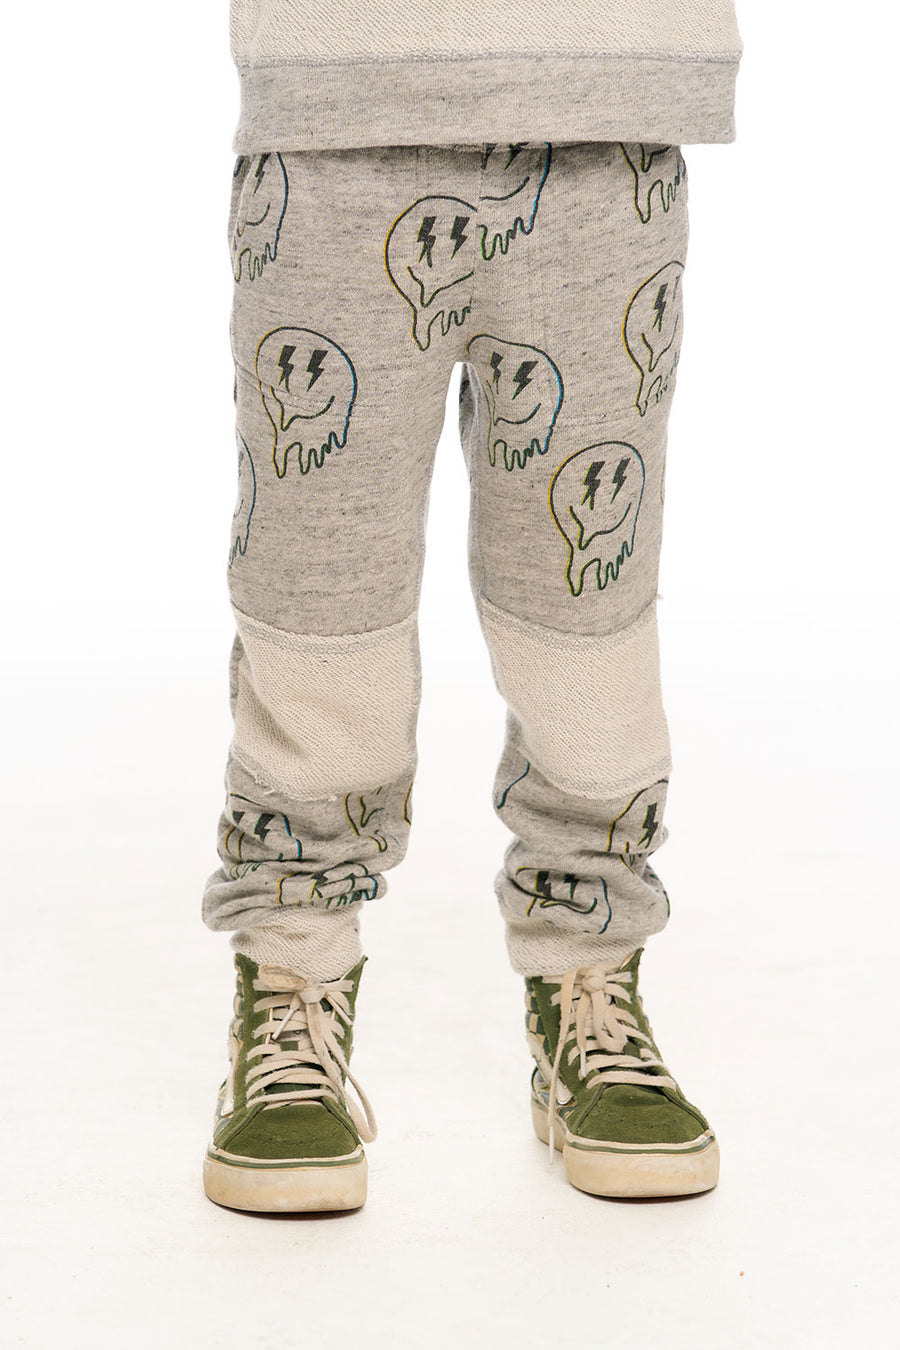 Drippy Smile Pants BOYS chaserbrand